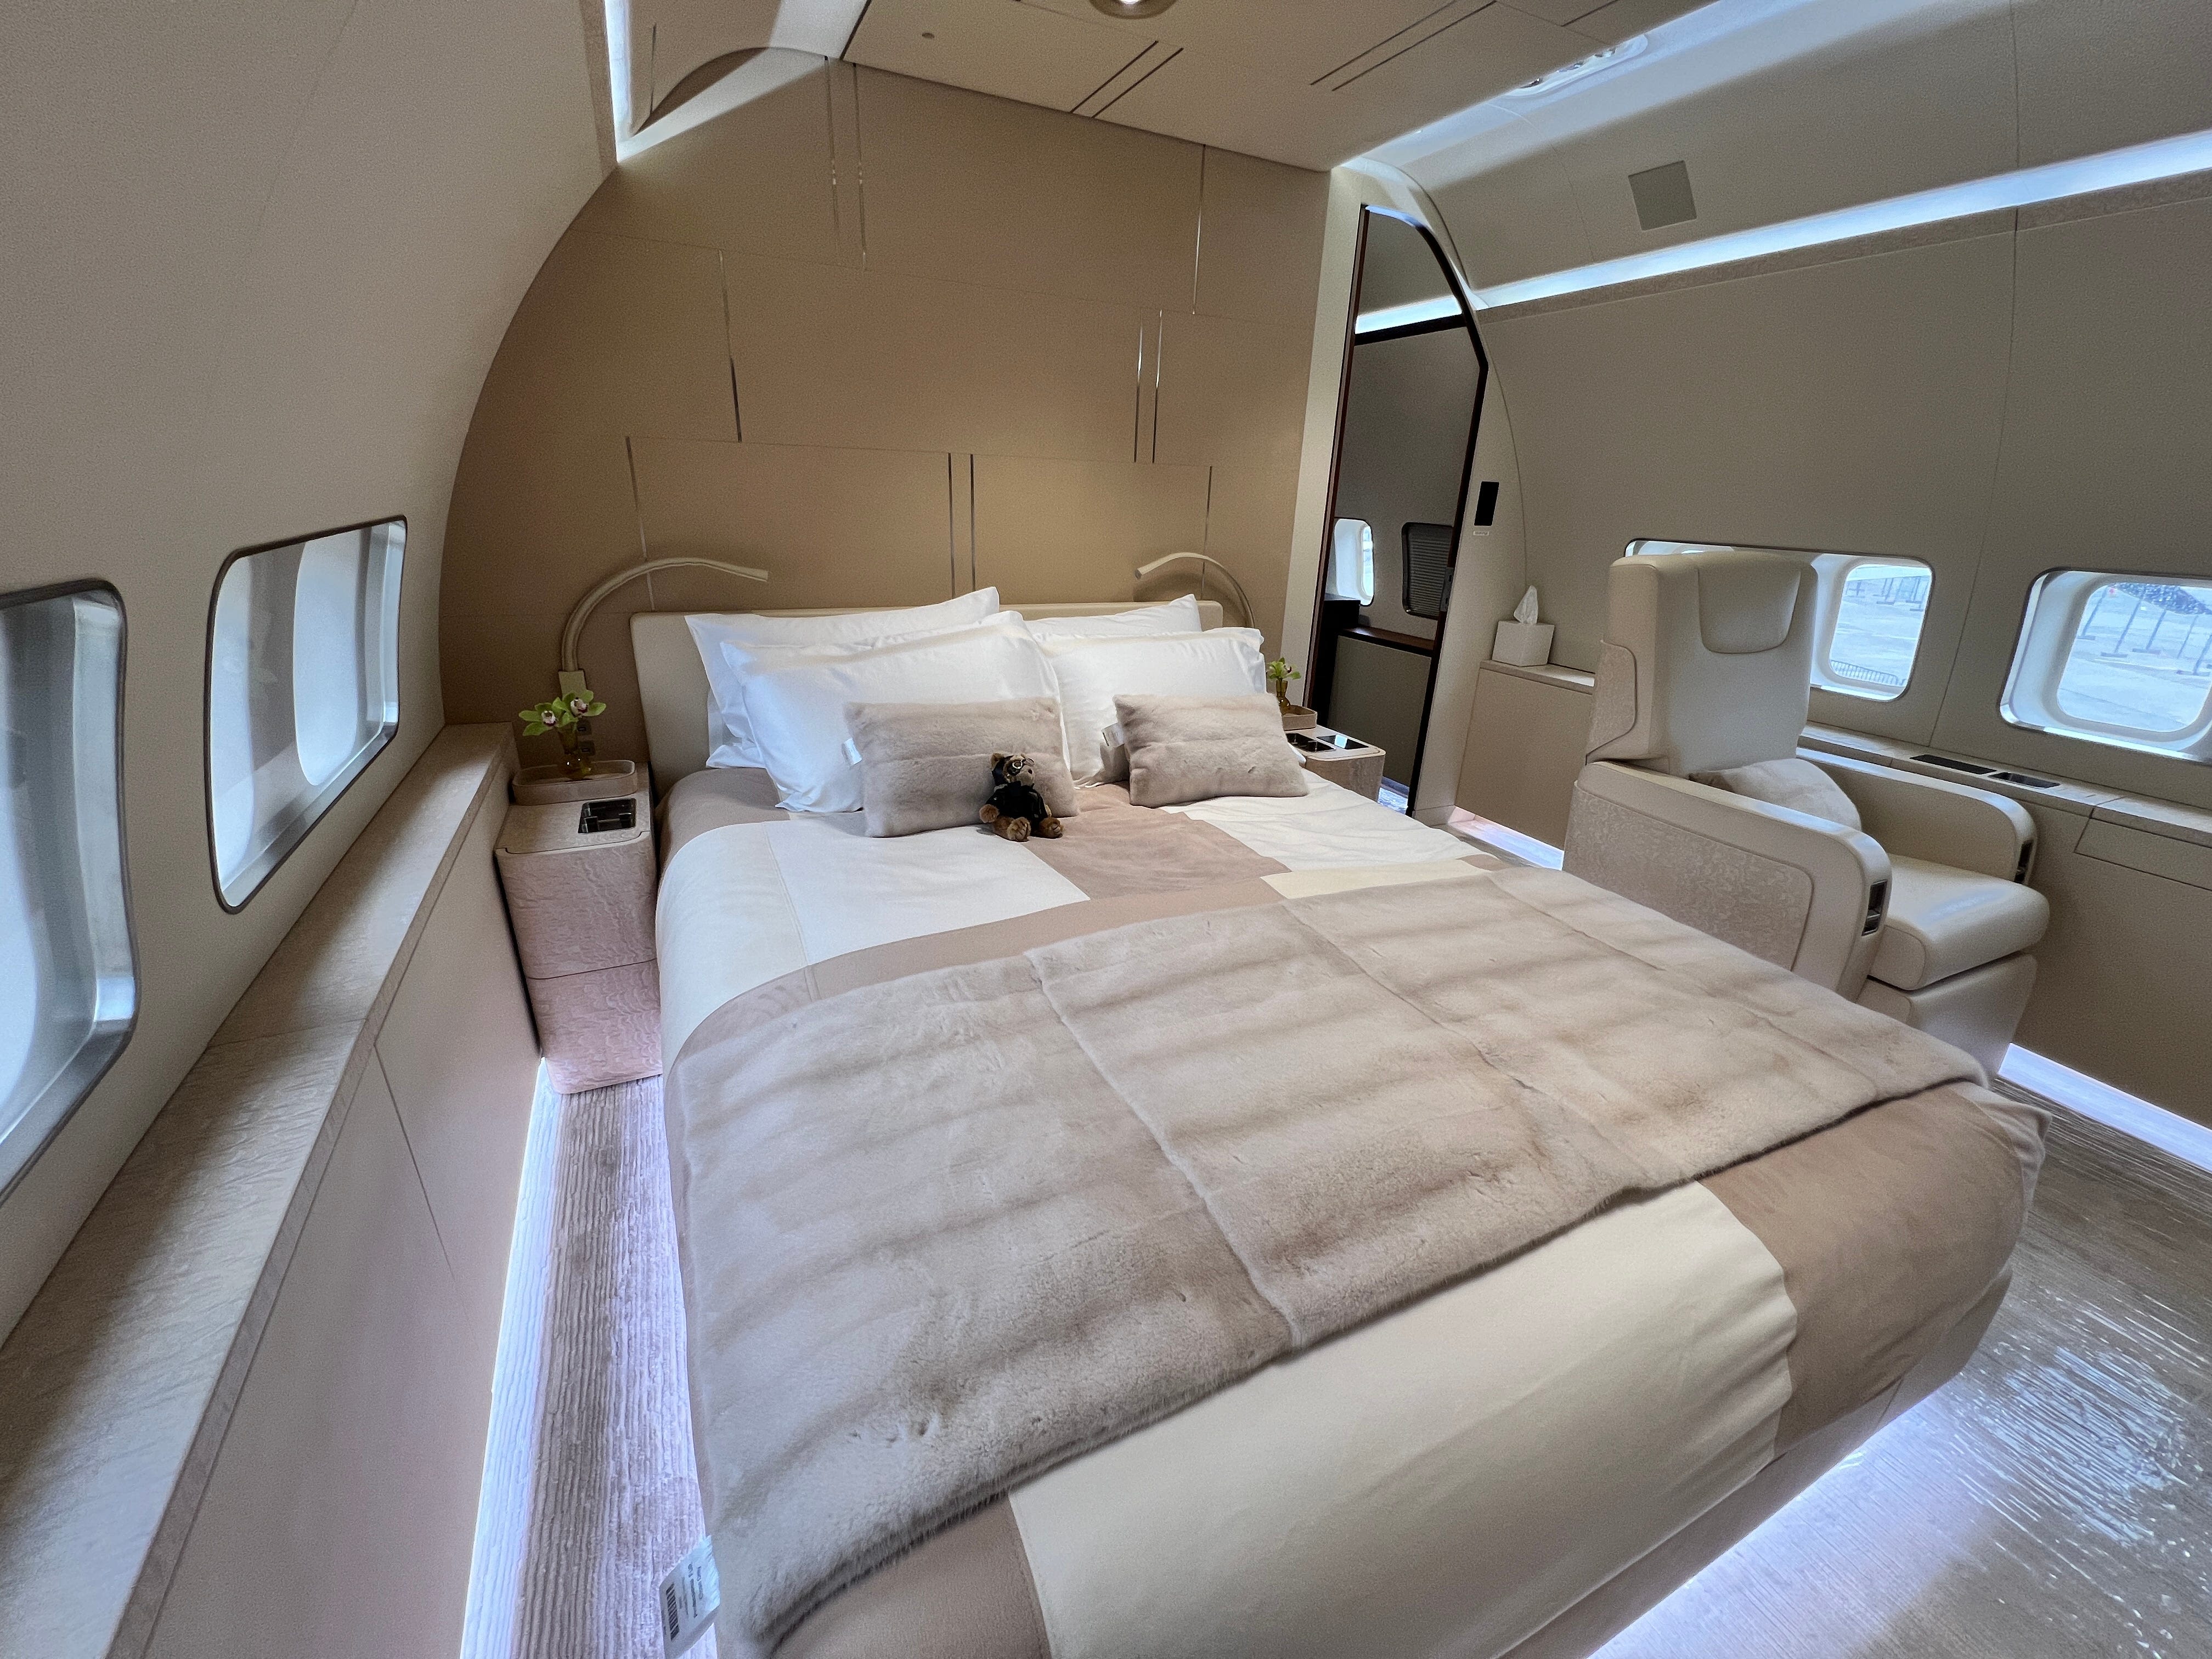 See inside the first private-jet version of the Boeing 737 Max. The extravagant plane is worth over $100 million and has a bar, two bedrooms, and huge showers.